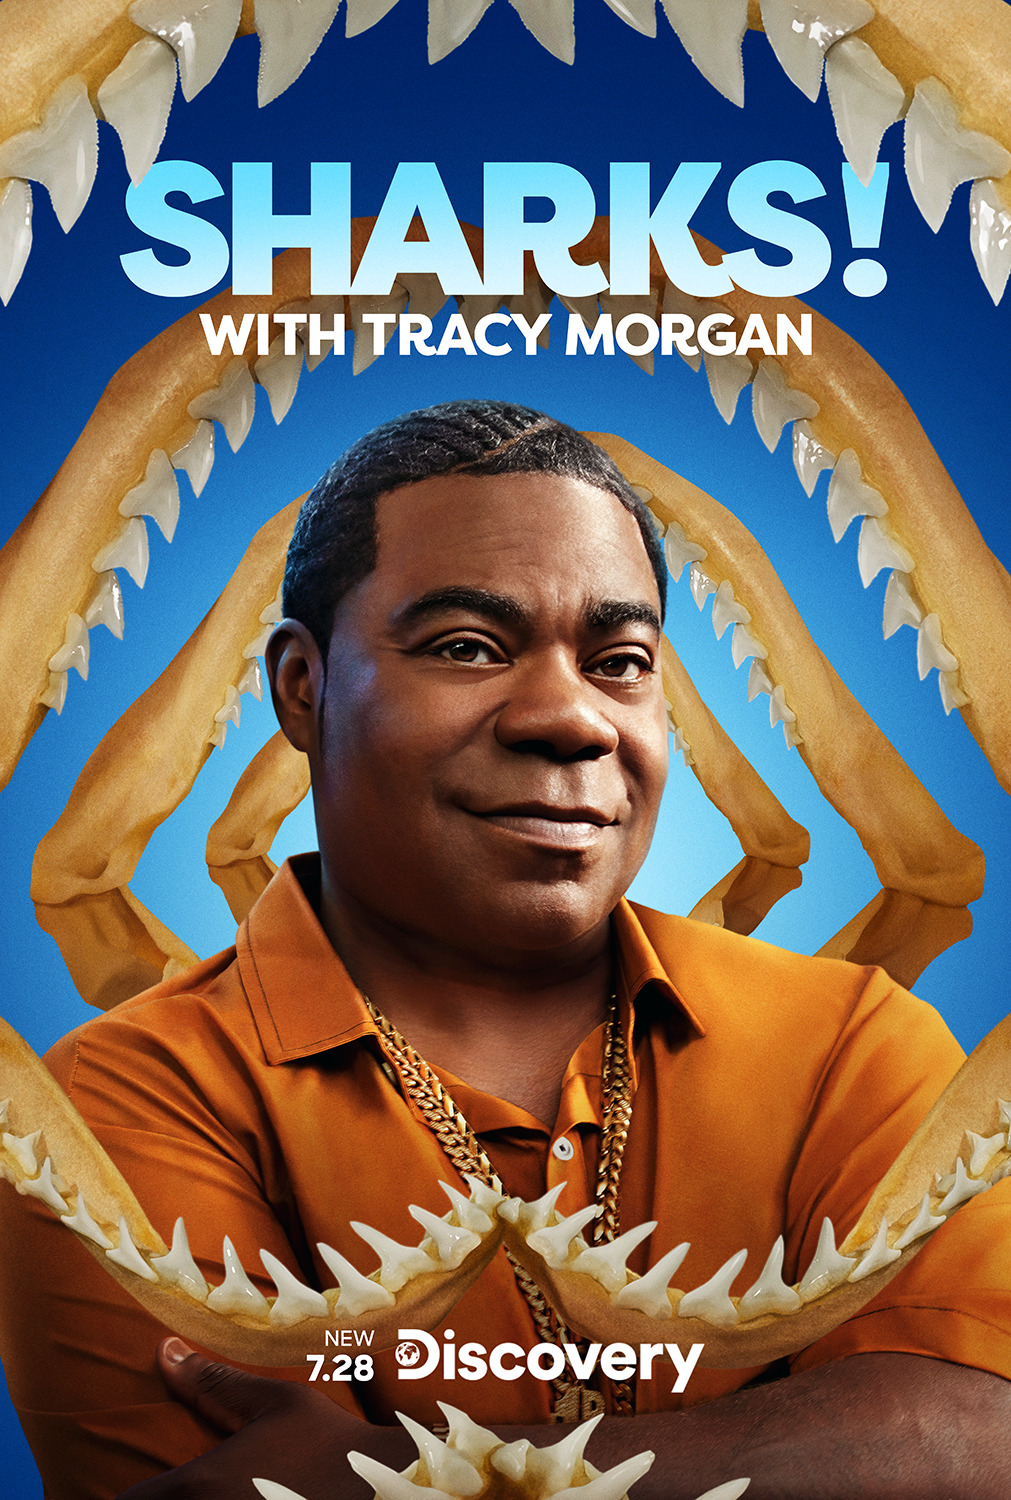 Extra Large Movie Poster Image for Sharks! with Tracy Morgan 